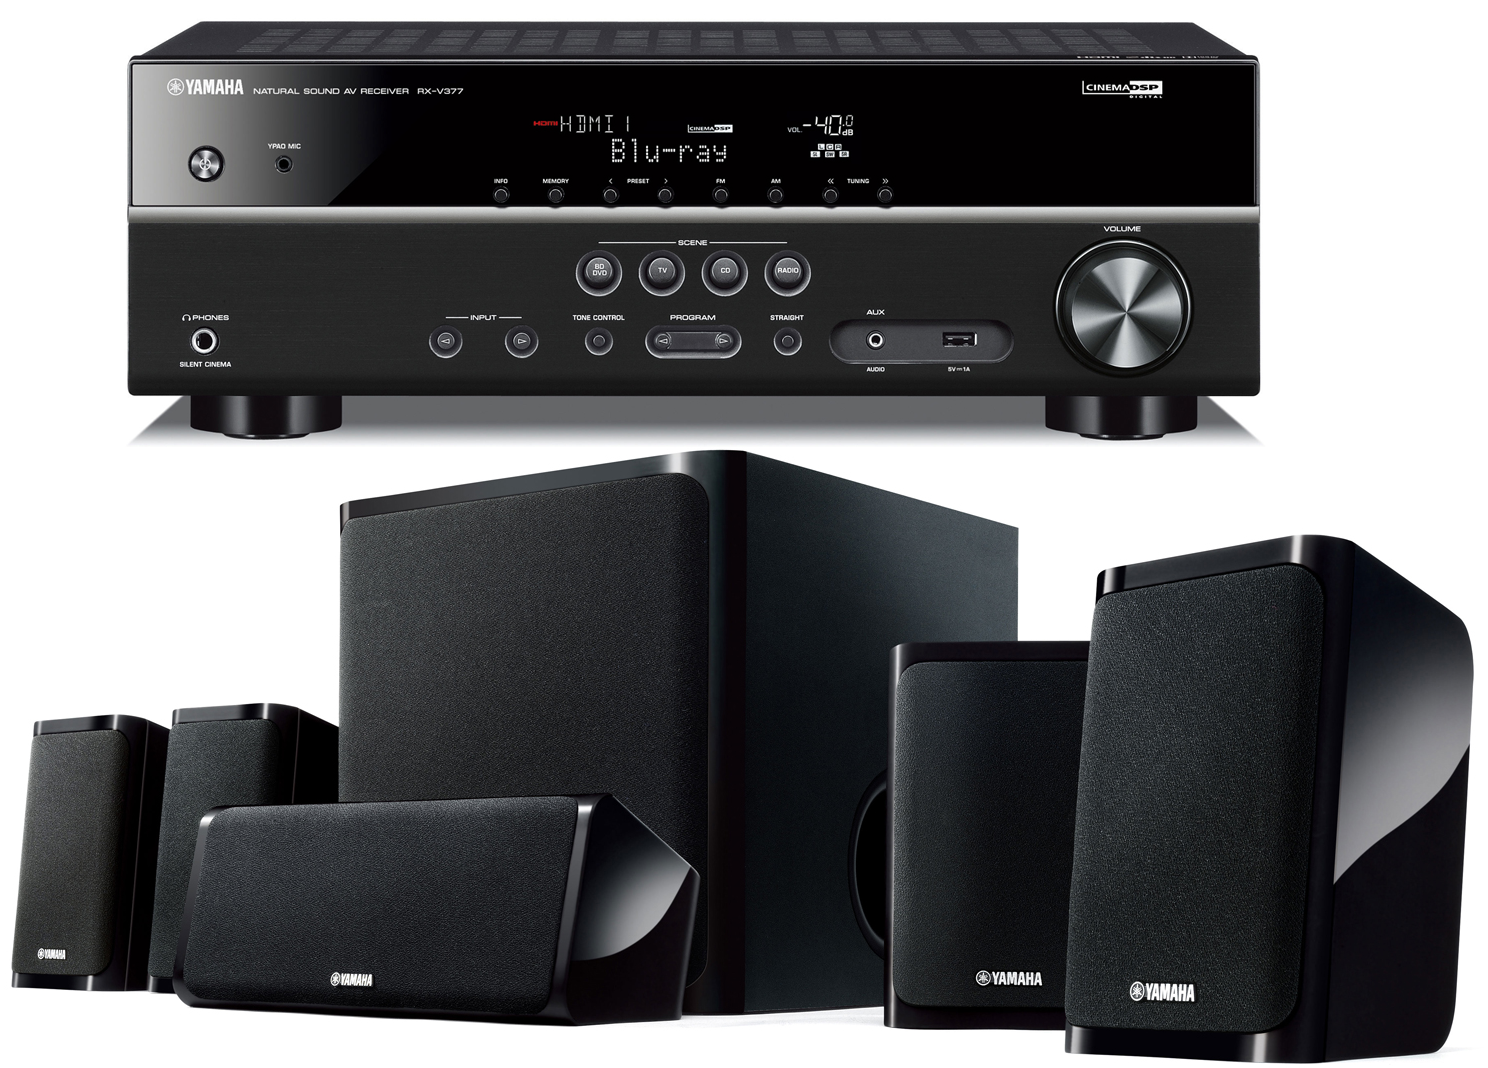 YAMAHA YHT-4910U 5.1-Channel Home Theater System | Accessories4less